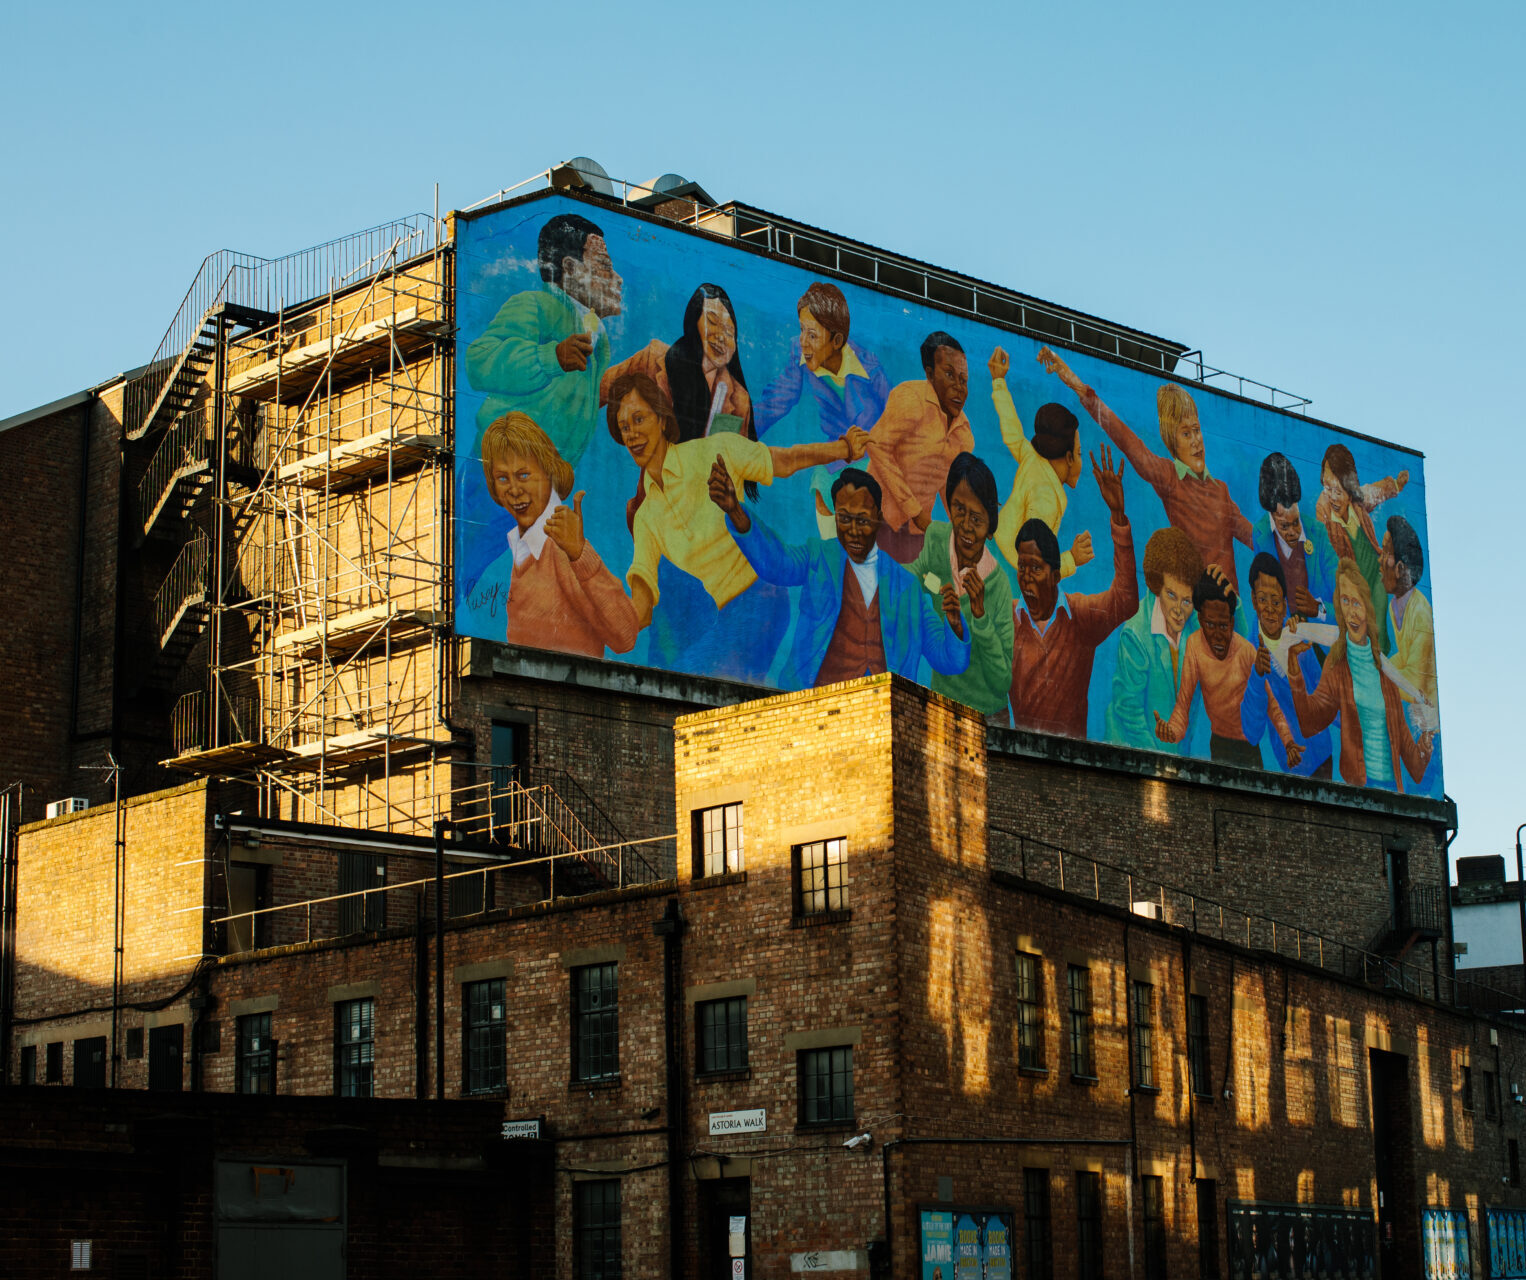 Community billboard, photography by Francis Augusto